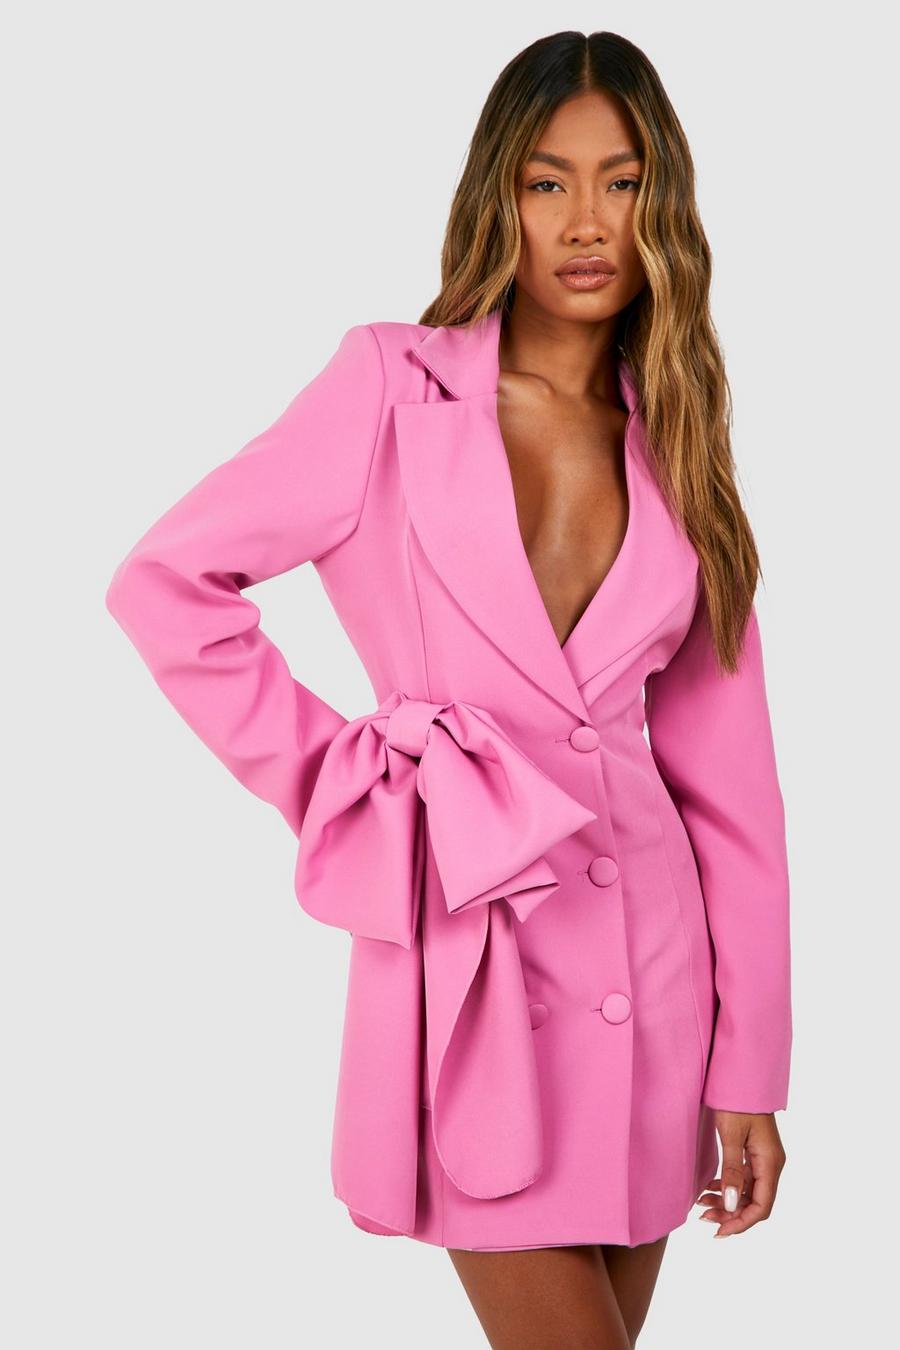 Candy pink Bow Detail Double Breasted Blazer Dress